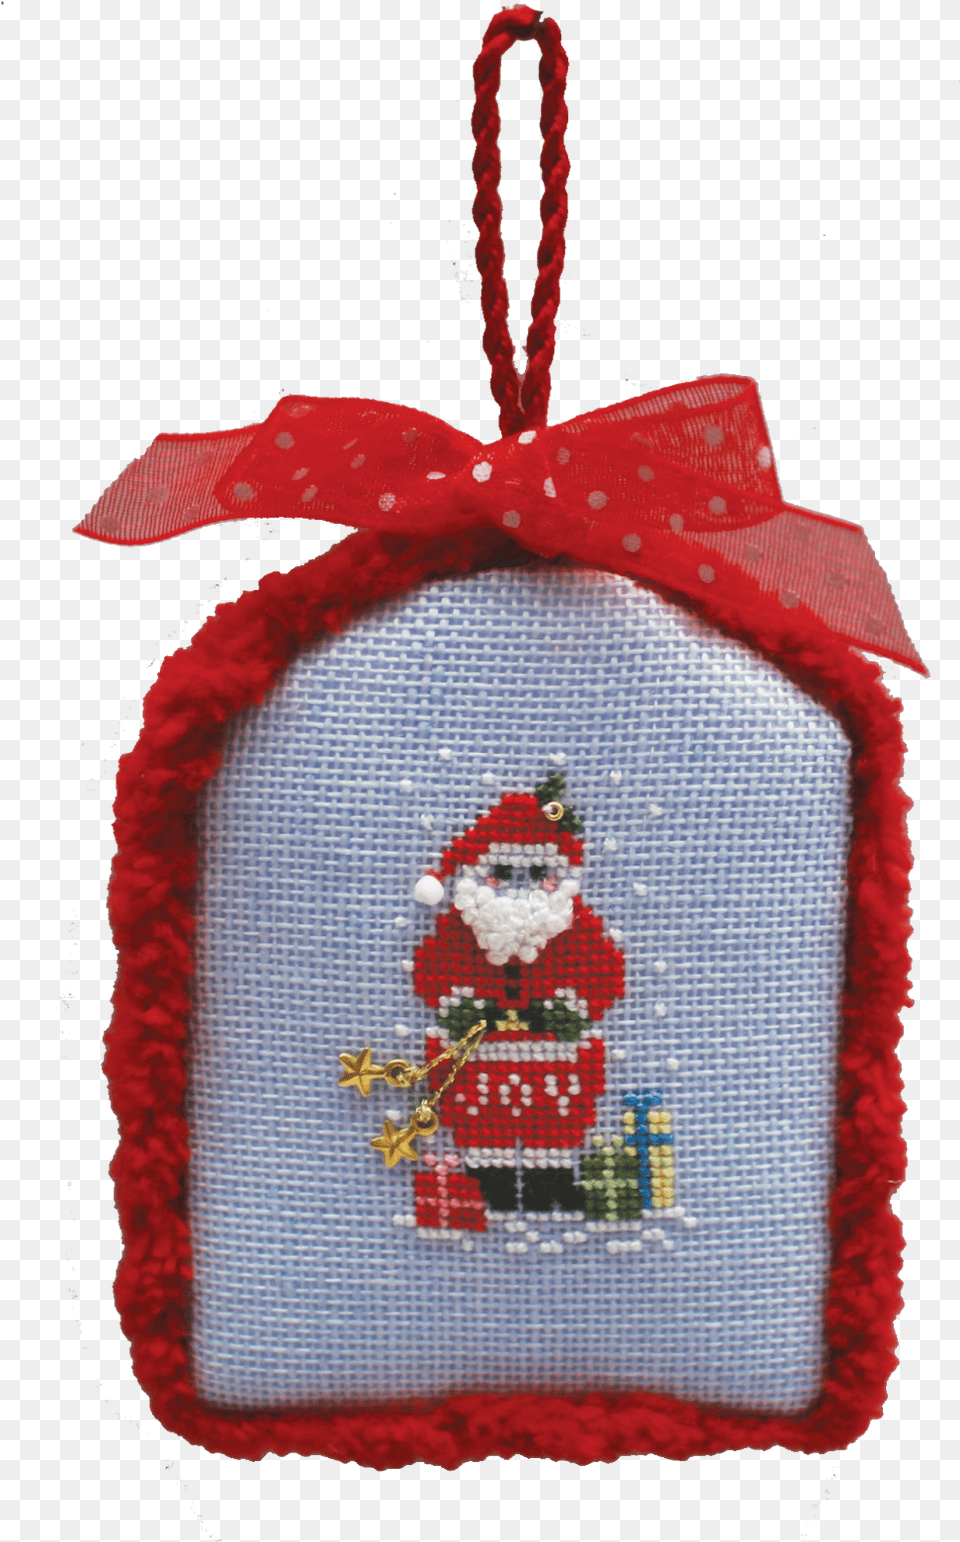 Transparent Vintage Christmas Ornaments Cross Stitch, Applique, Pattern, Embroidery, Accessories Png Image